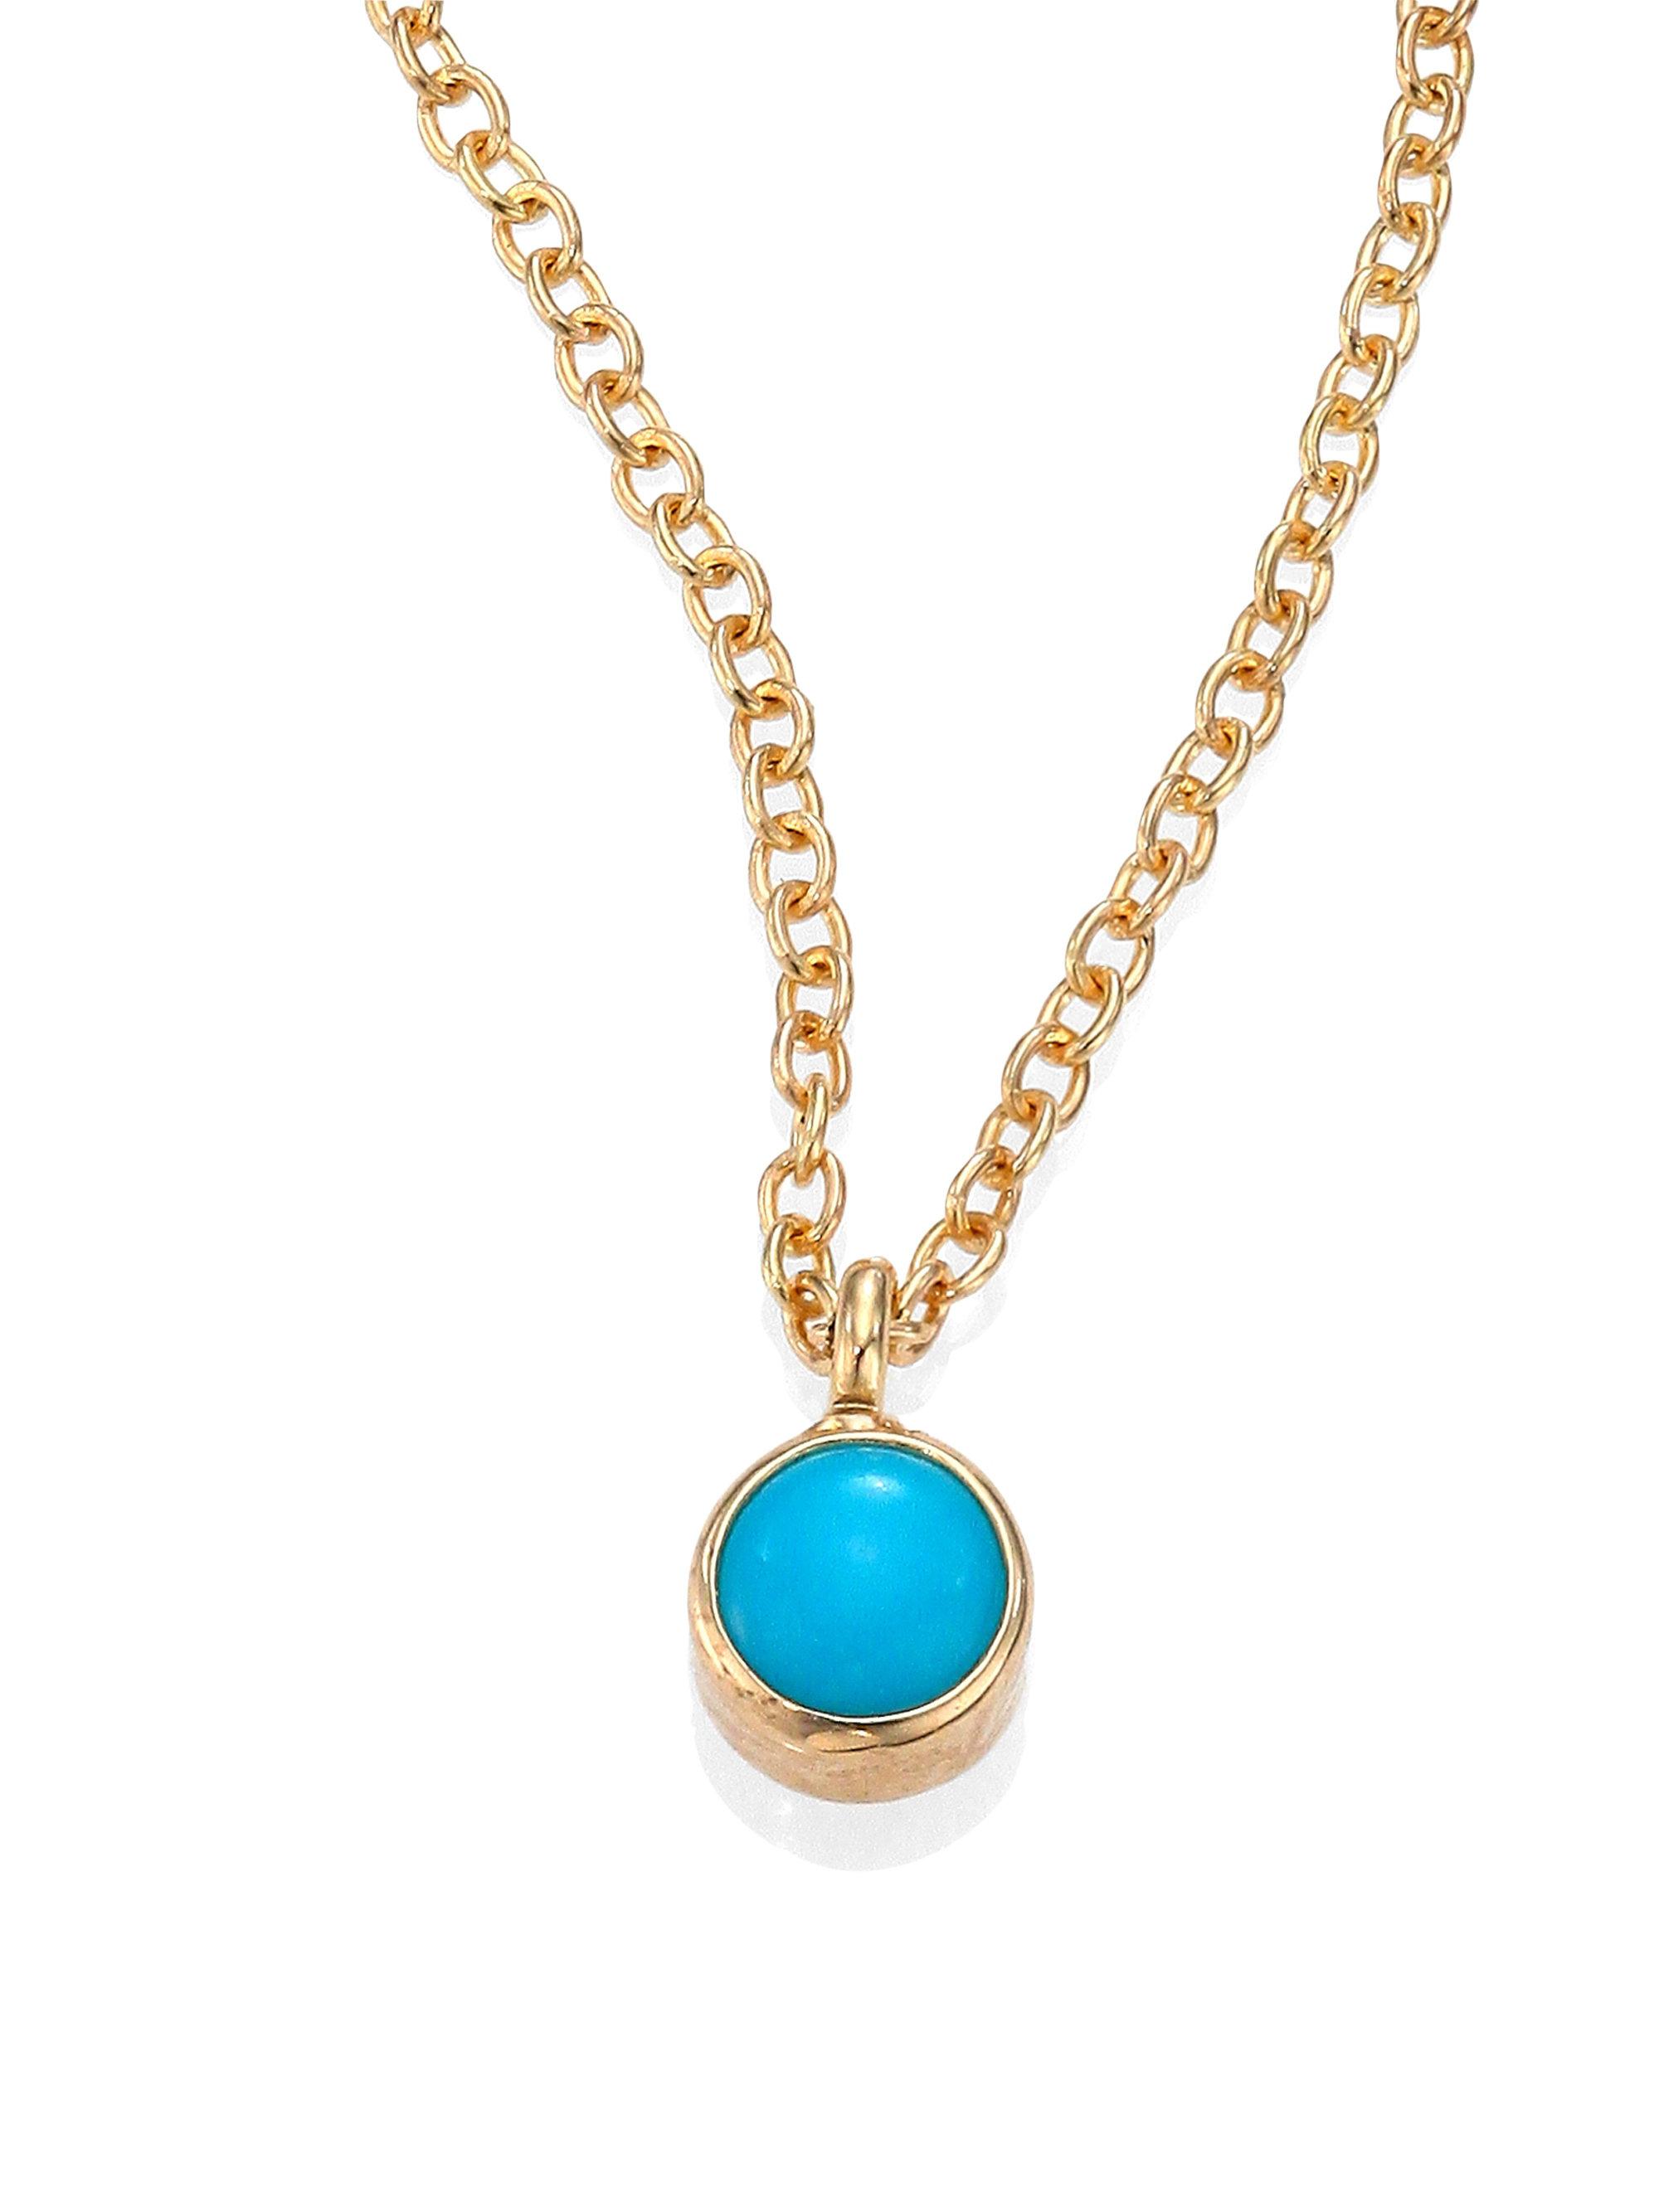 Zoe Chicco Turquoise & 14k Yellow Gold Pendant Necklace in Gold ...